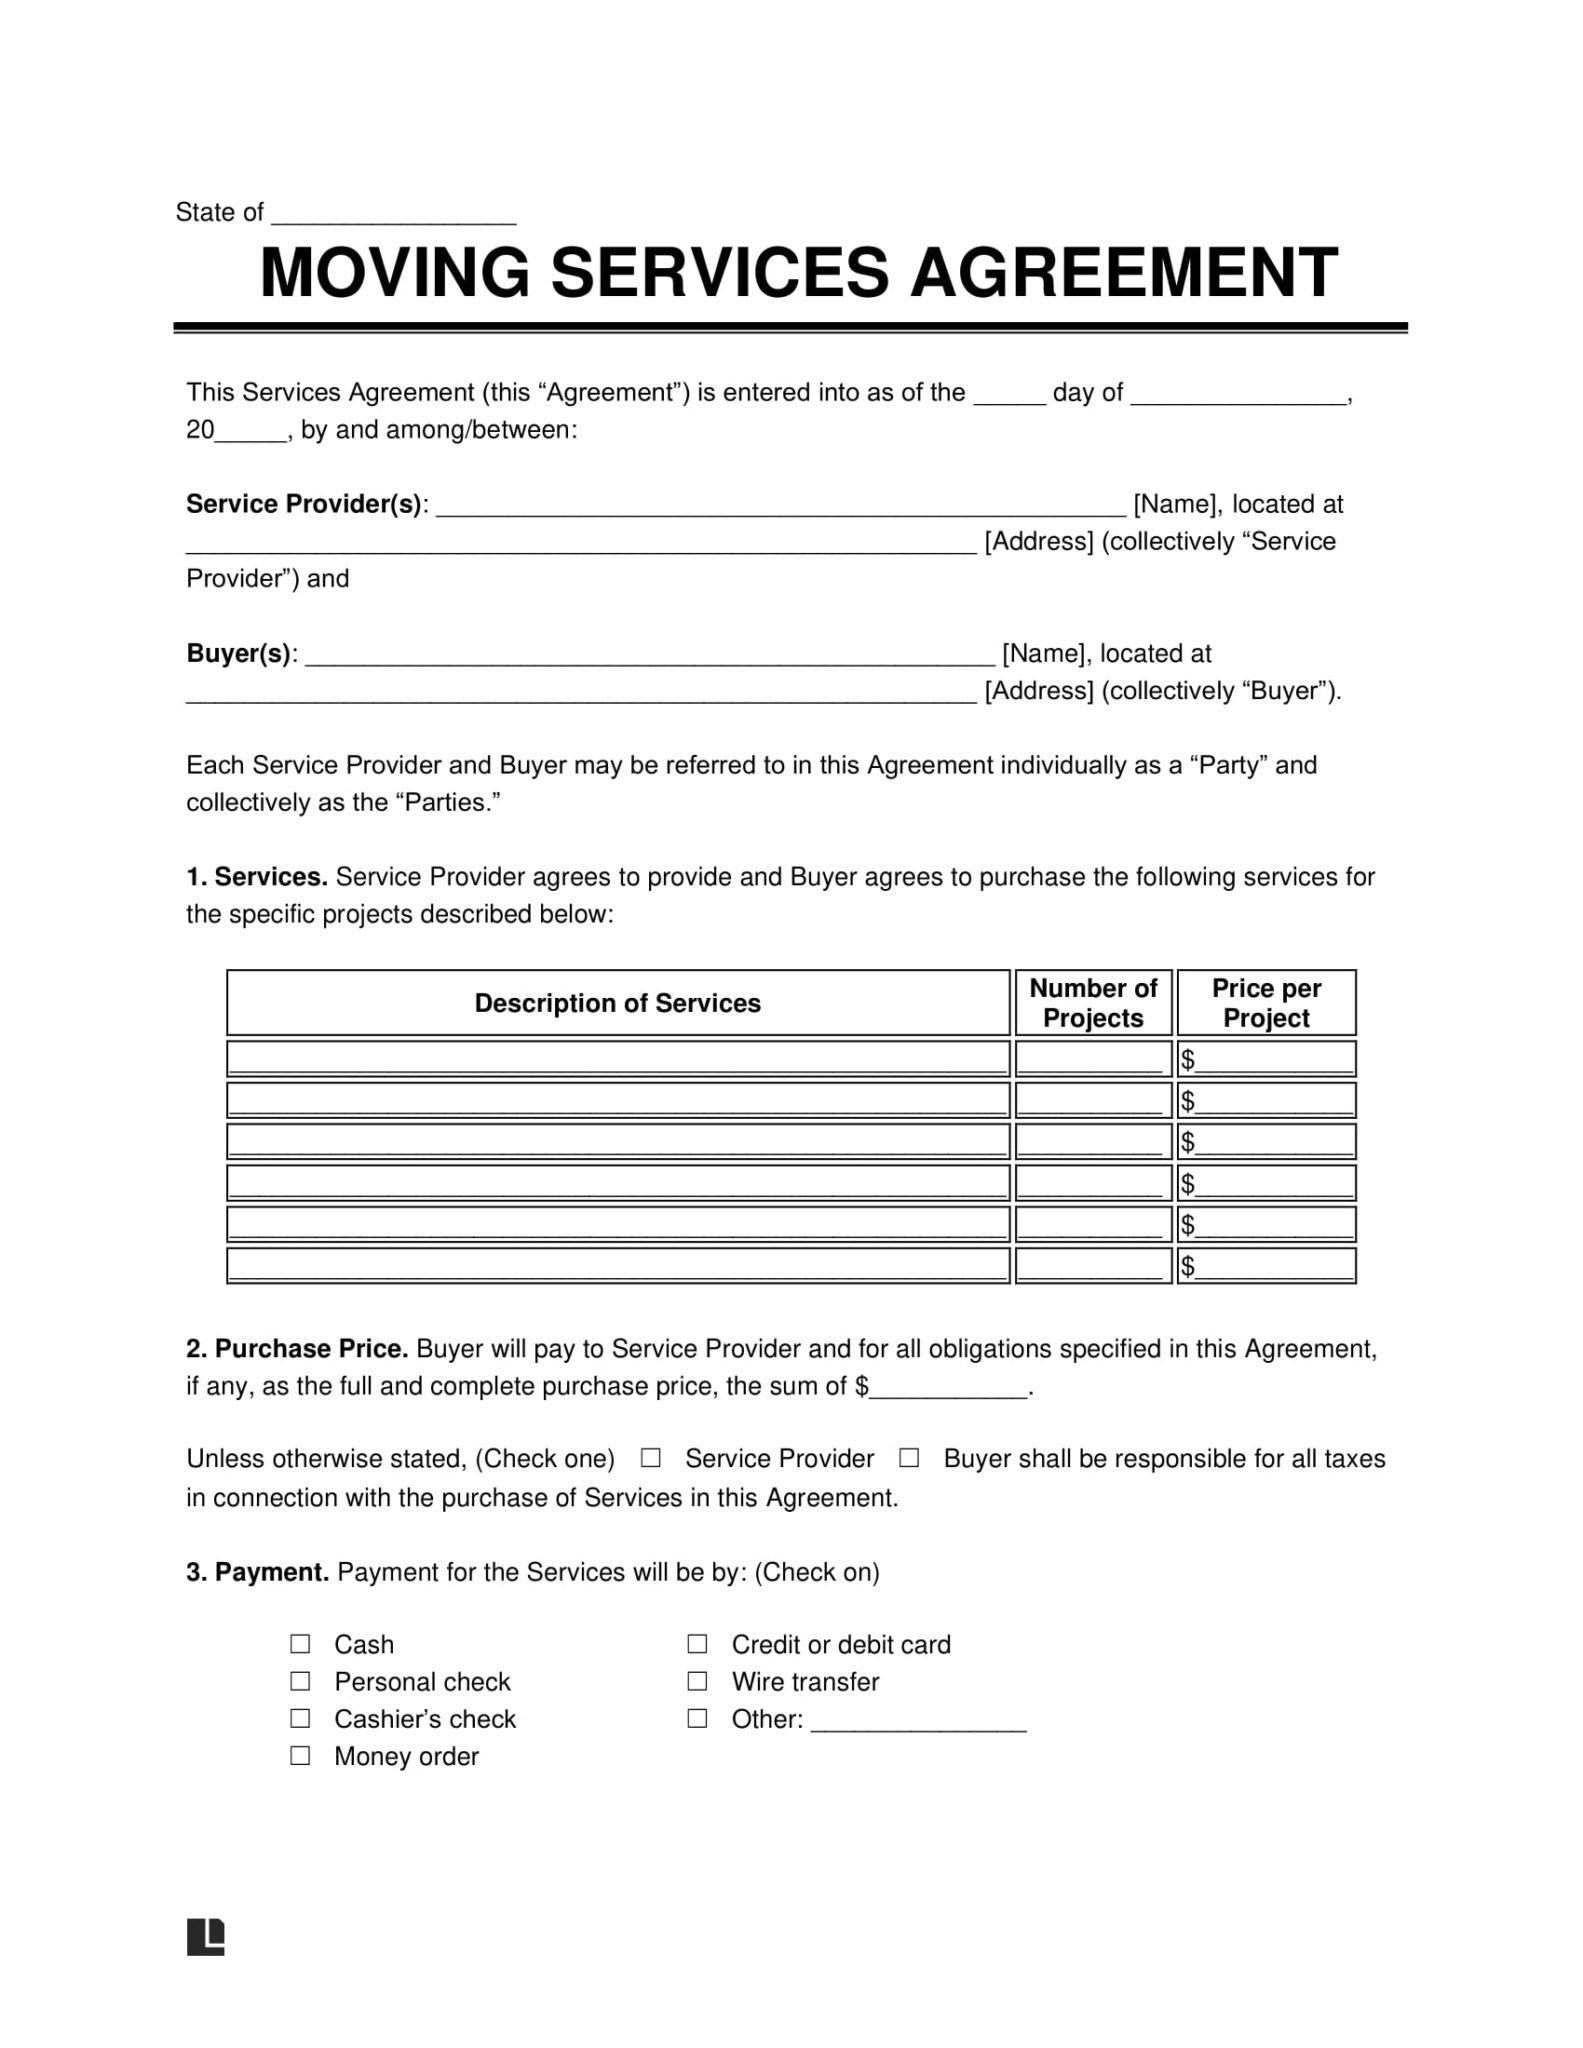 cleaning-contract-agreement-free-printable-documents-cleaning